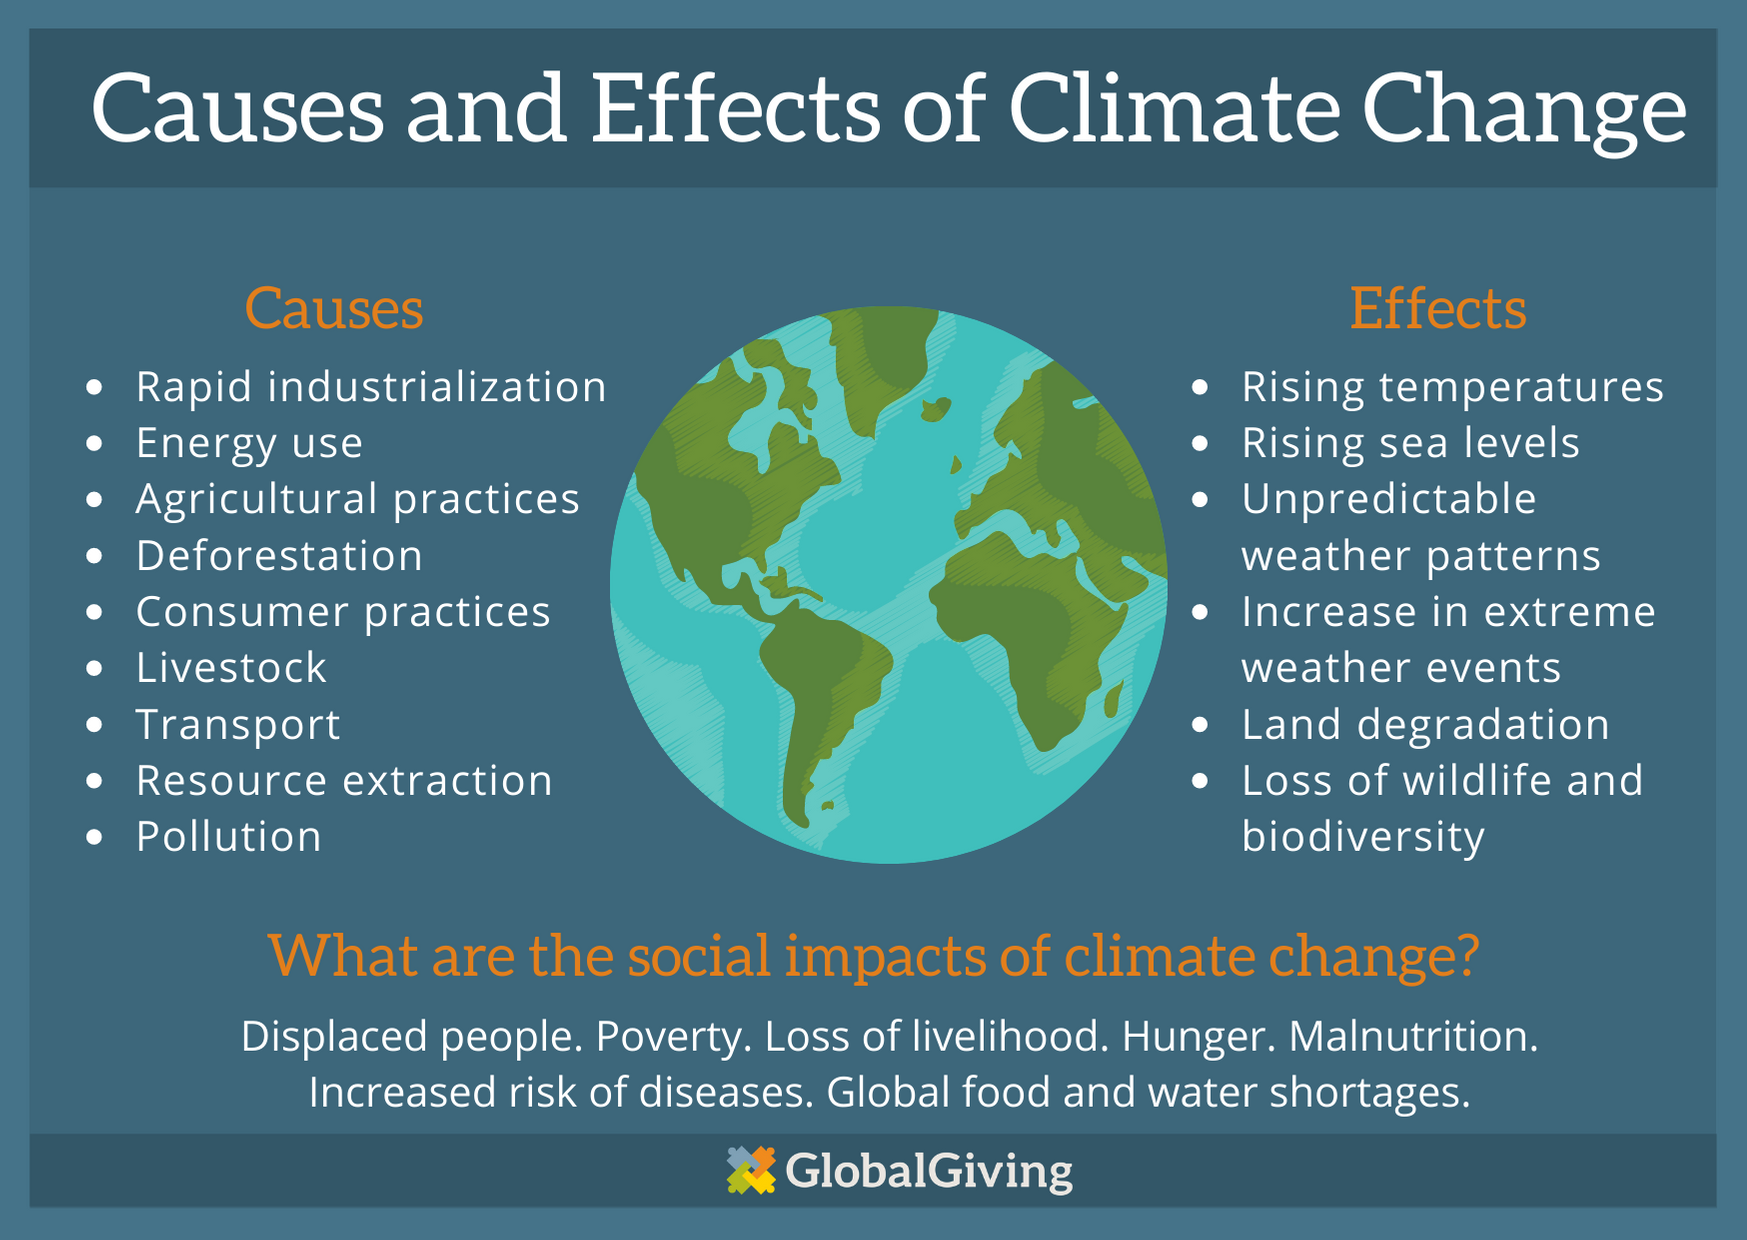 What are 4 global impacts of climate change?